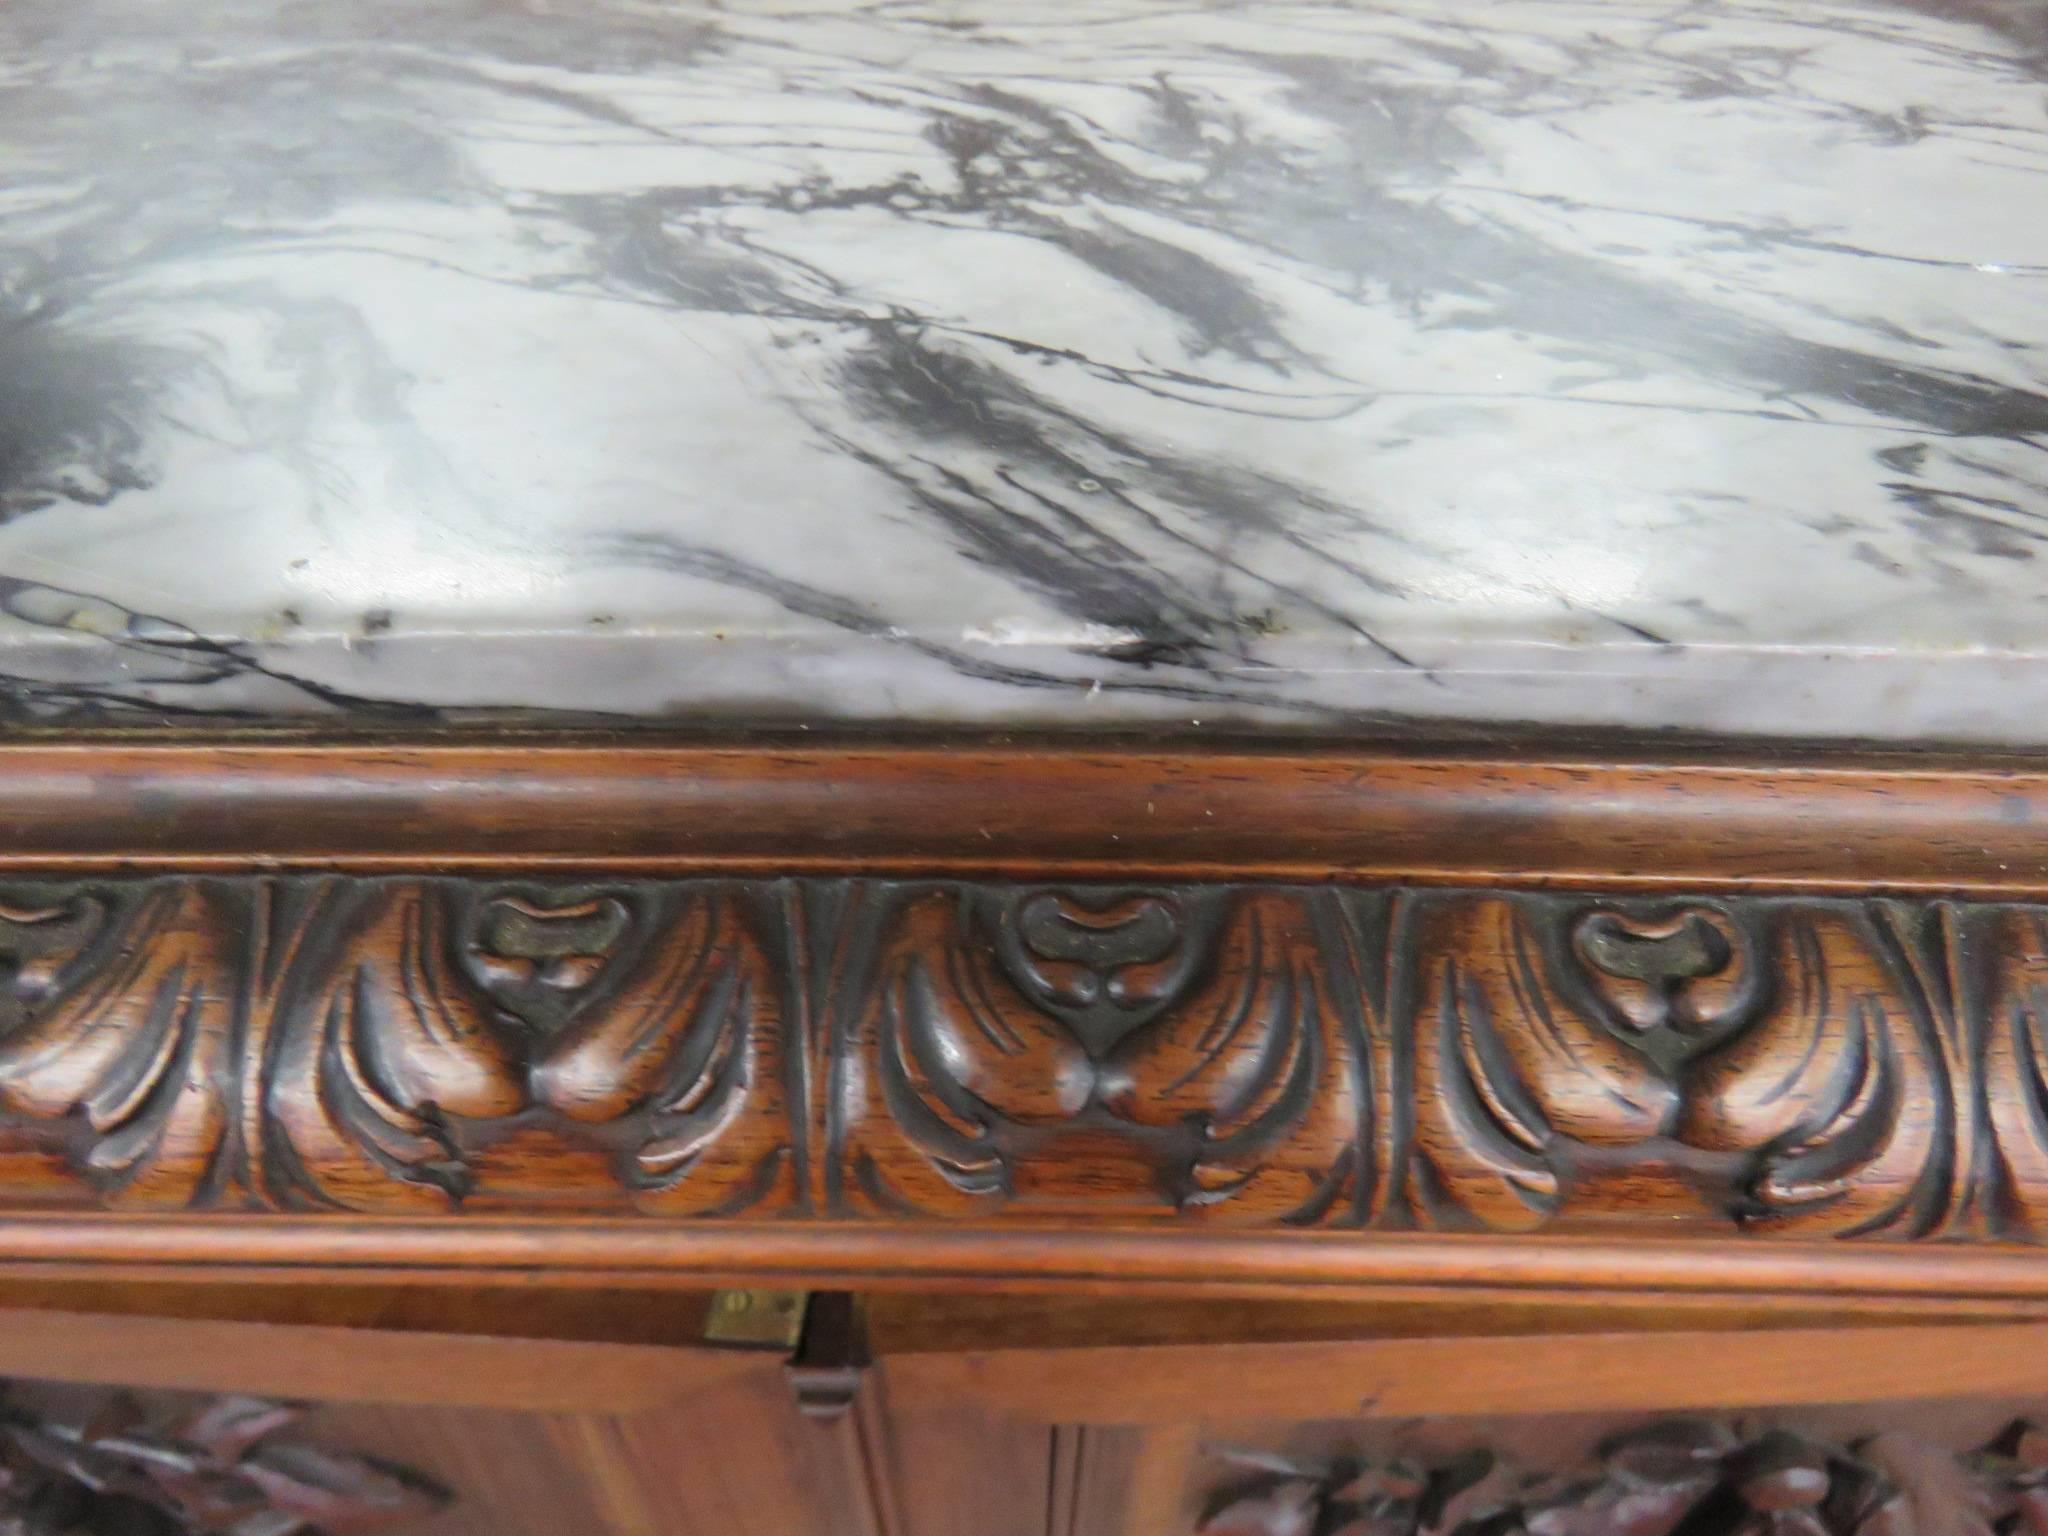 Carved griffins, fruit, gamebirds and fish. Mirrored back. Marble top.